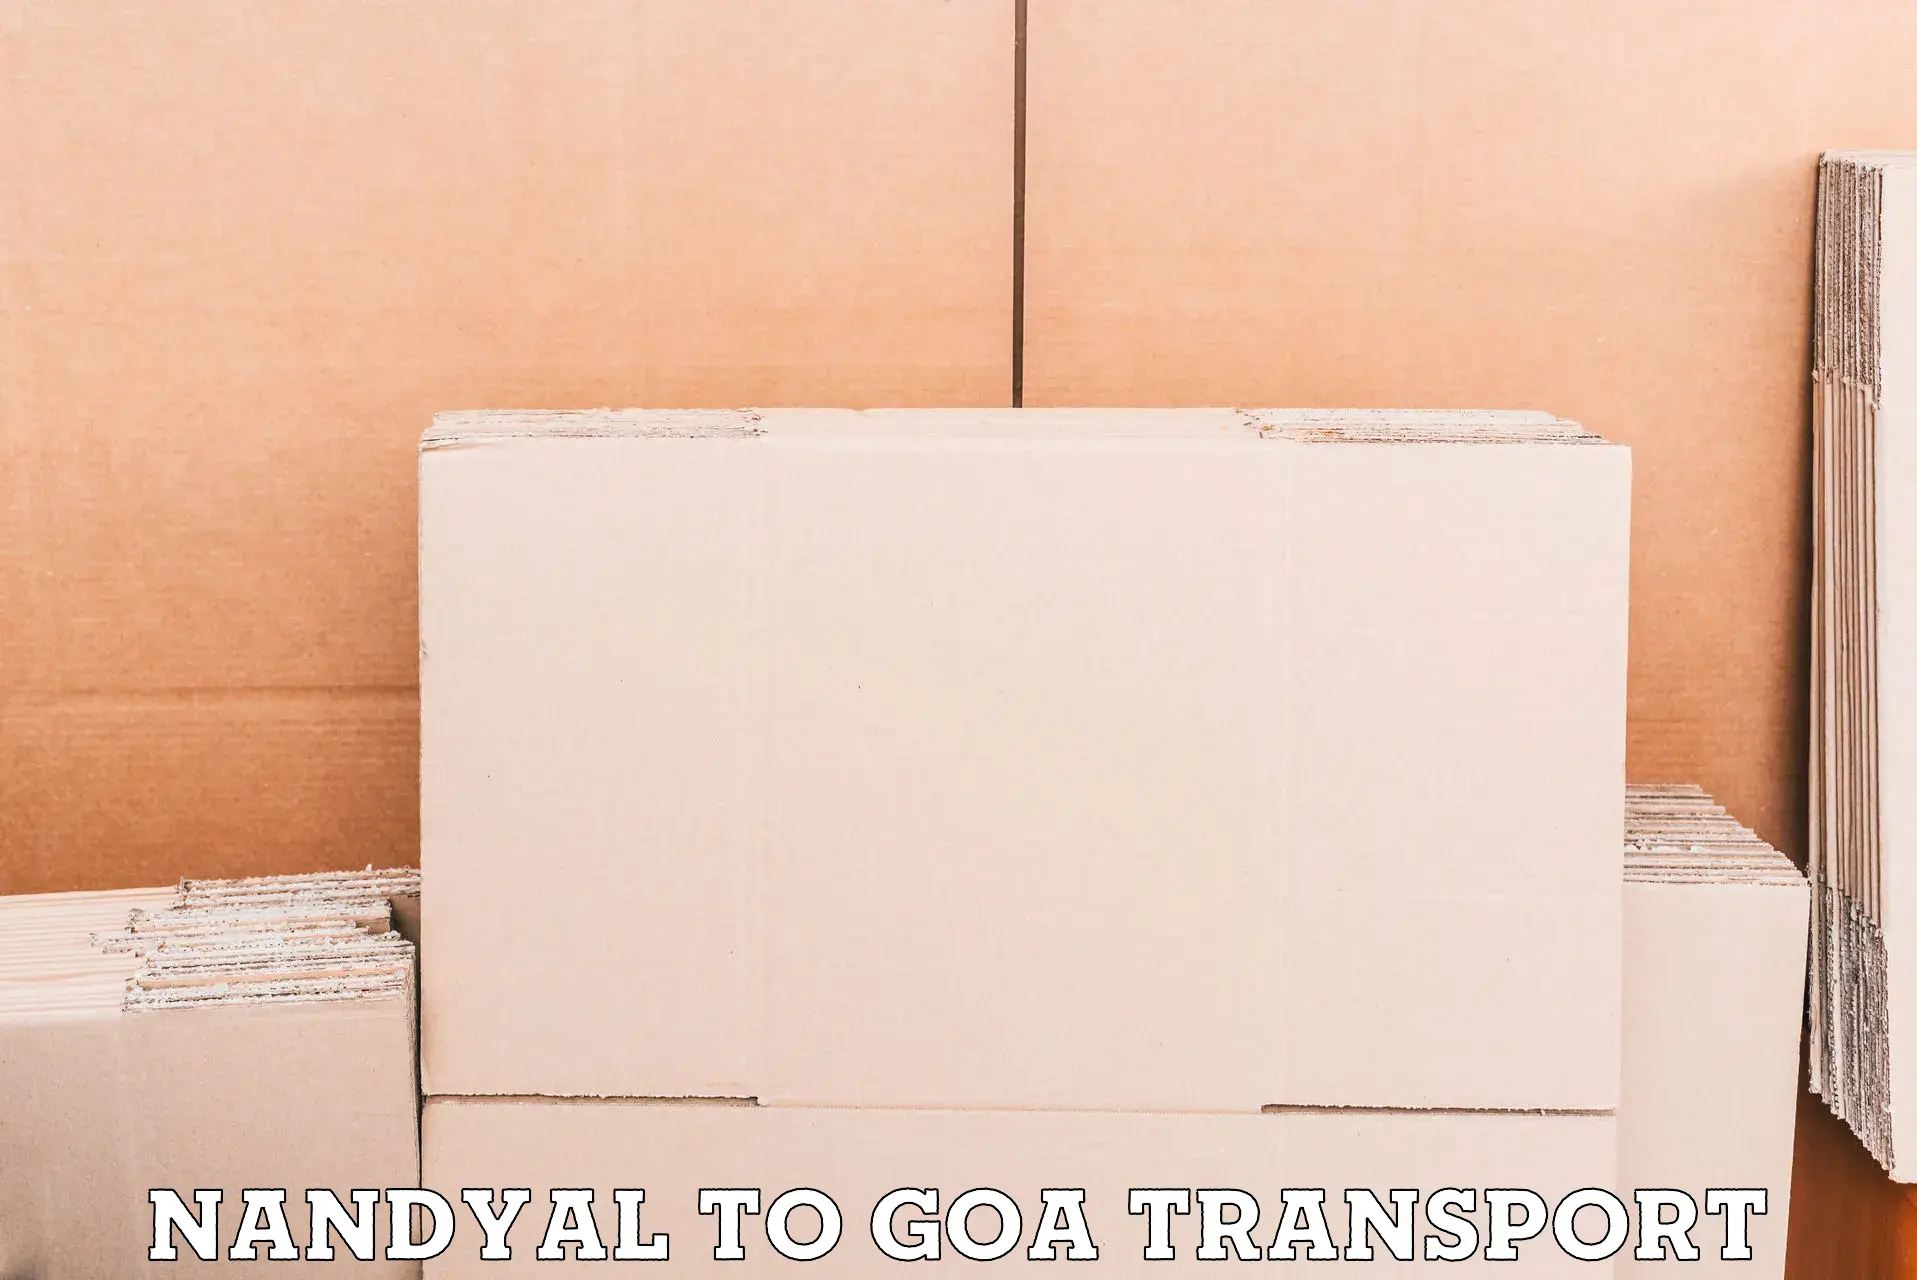 Container transport service Nandyal to Goa